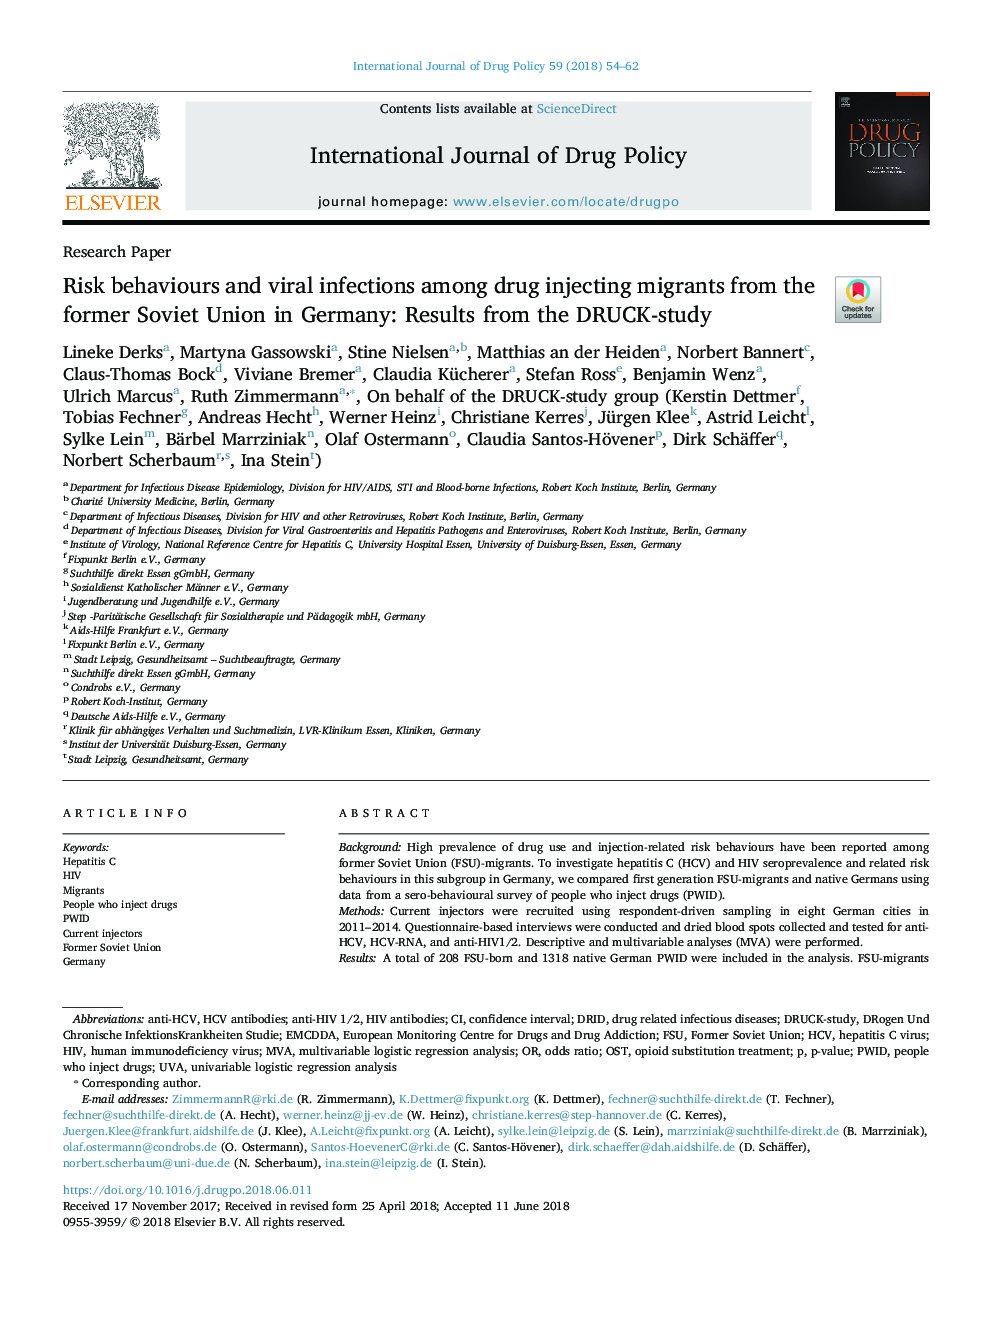 Risk behaviours and viral infections among drug injecting migrants from the former Soviet Union in Germany: Results from the DRUCK-study